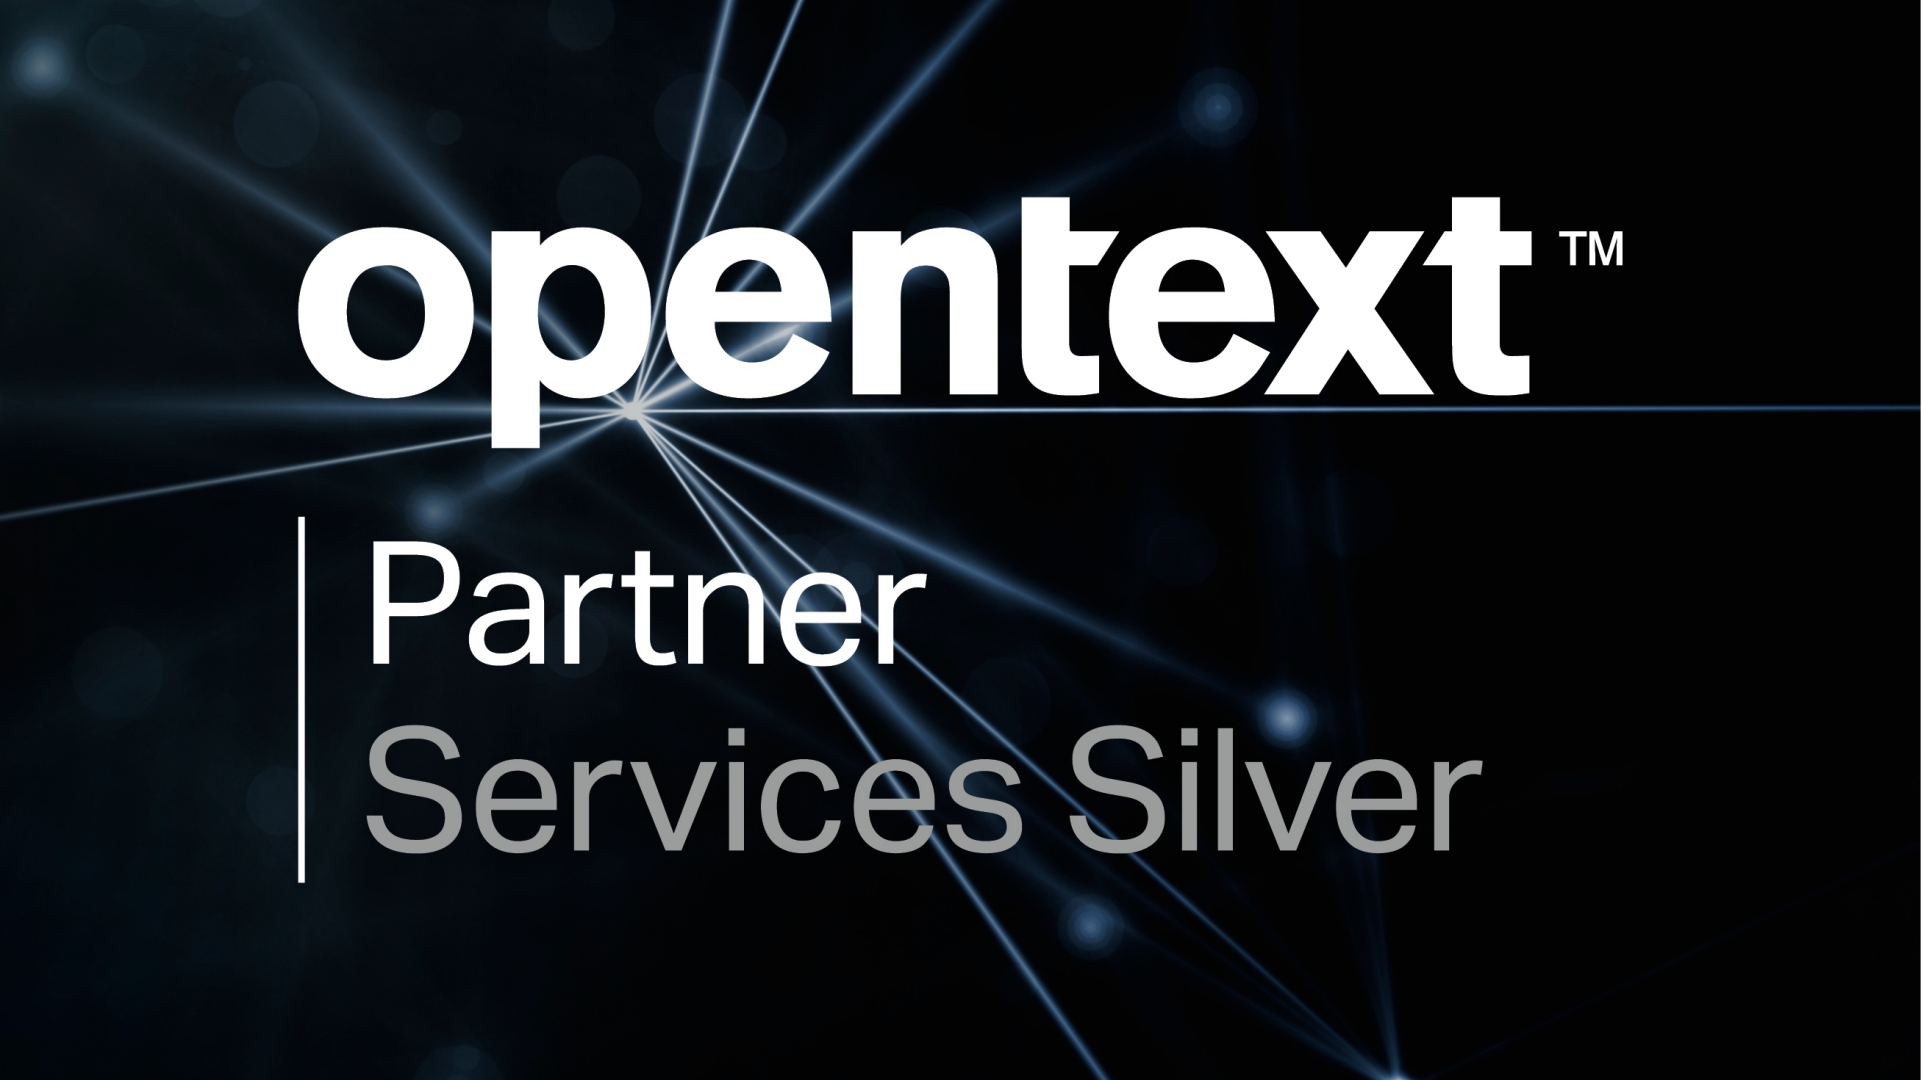 KPS is OpenText Partner - Services Silver